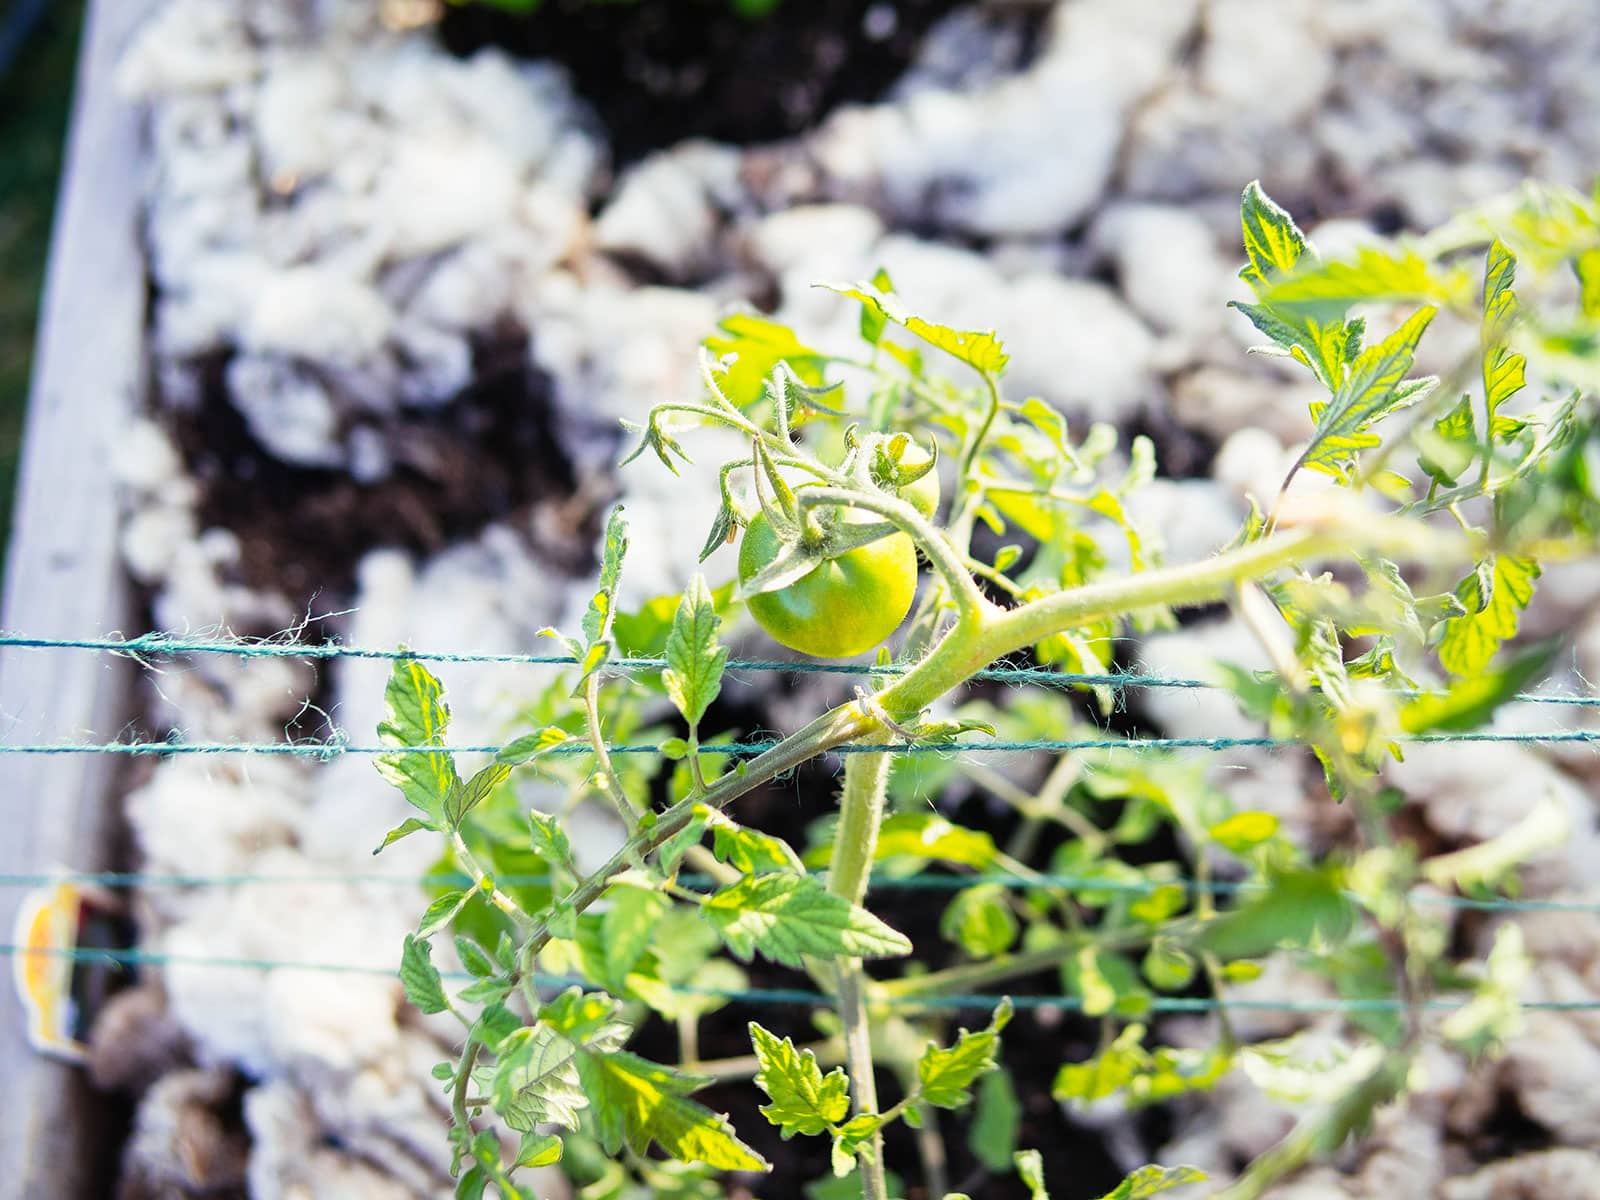 Overhead view of tomato stem being trellised by hemp twine in a Florida weave